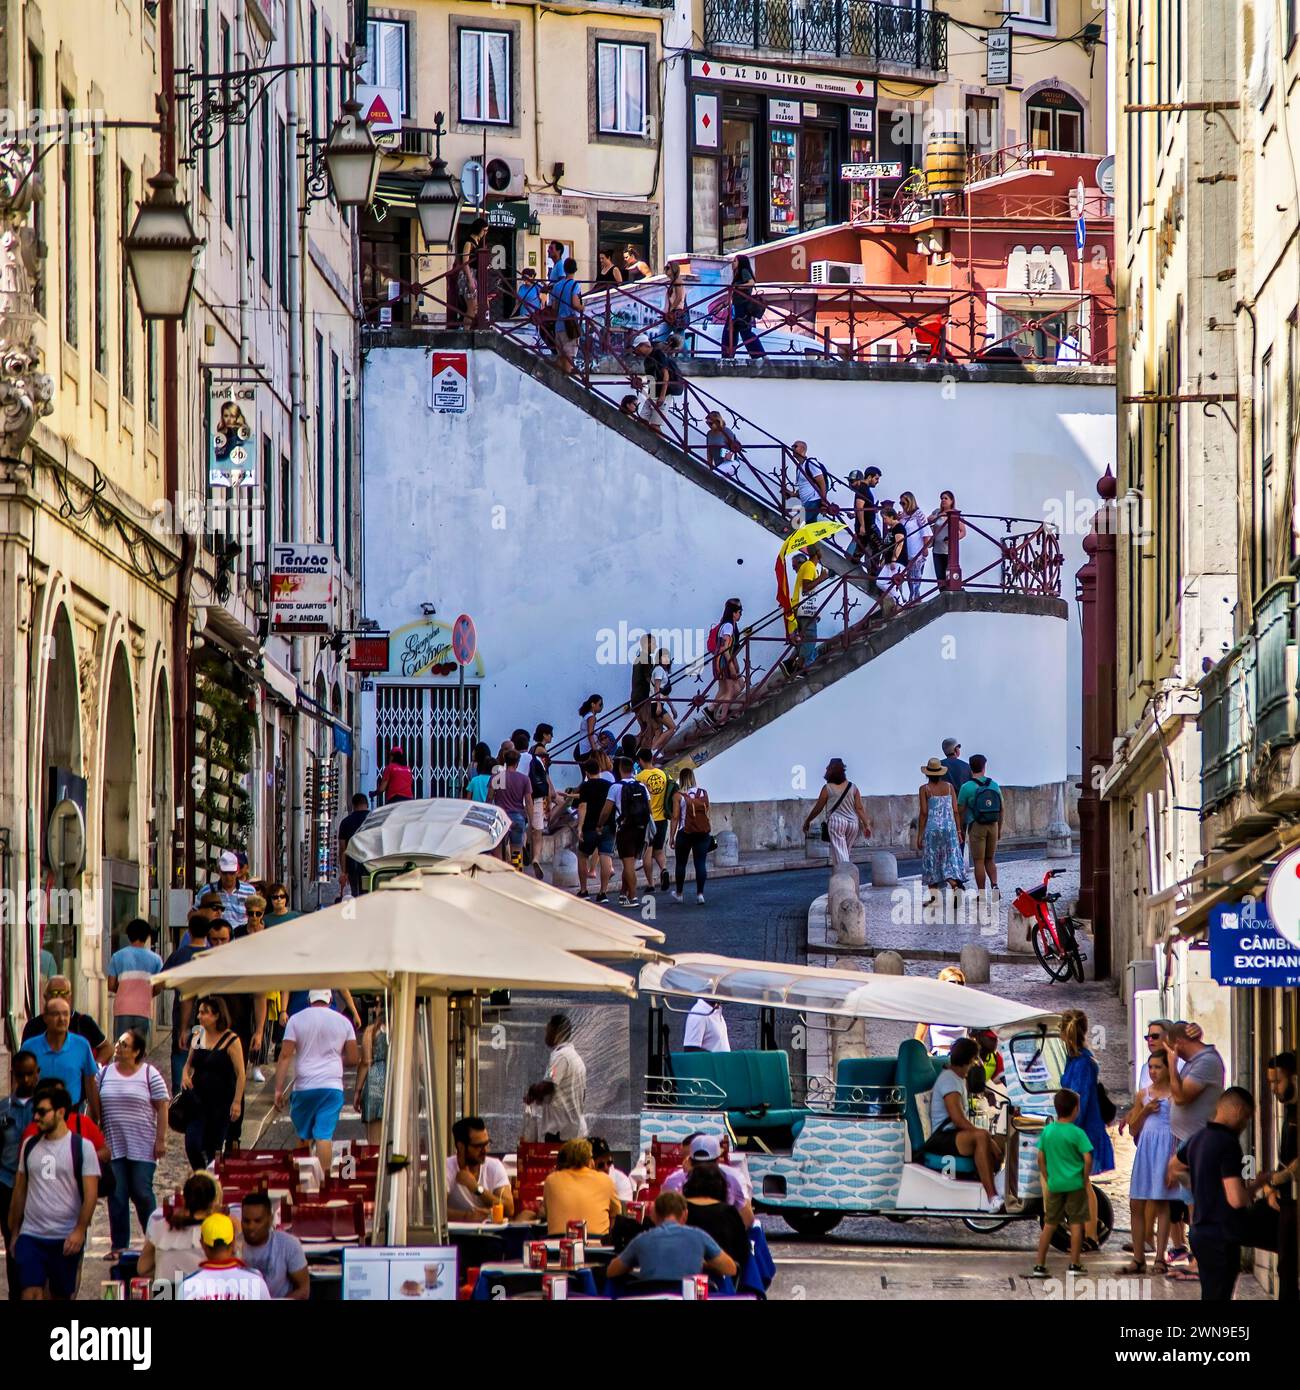 A bustling city street scene with people ascending and descending a staircase between European style buildings, Lisbon Stock Photo